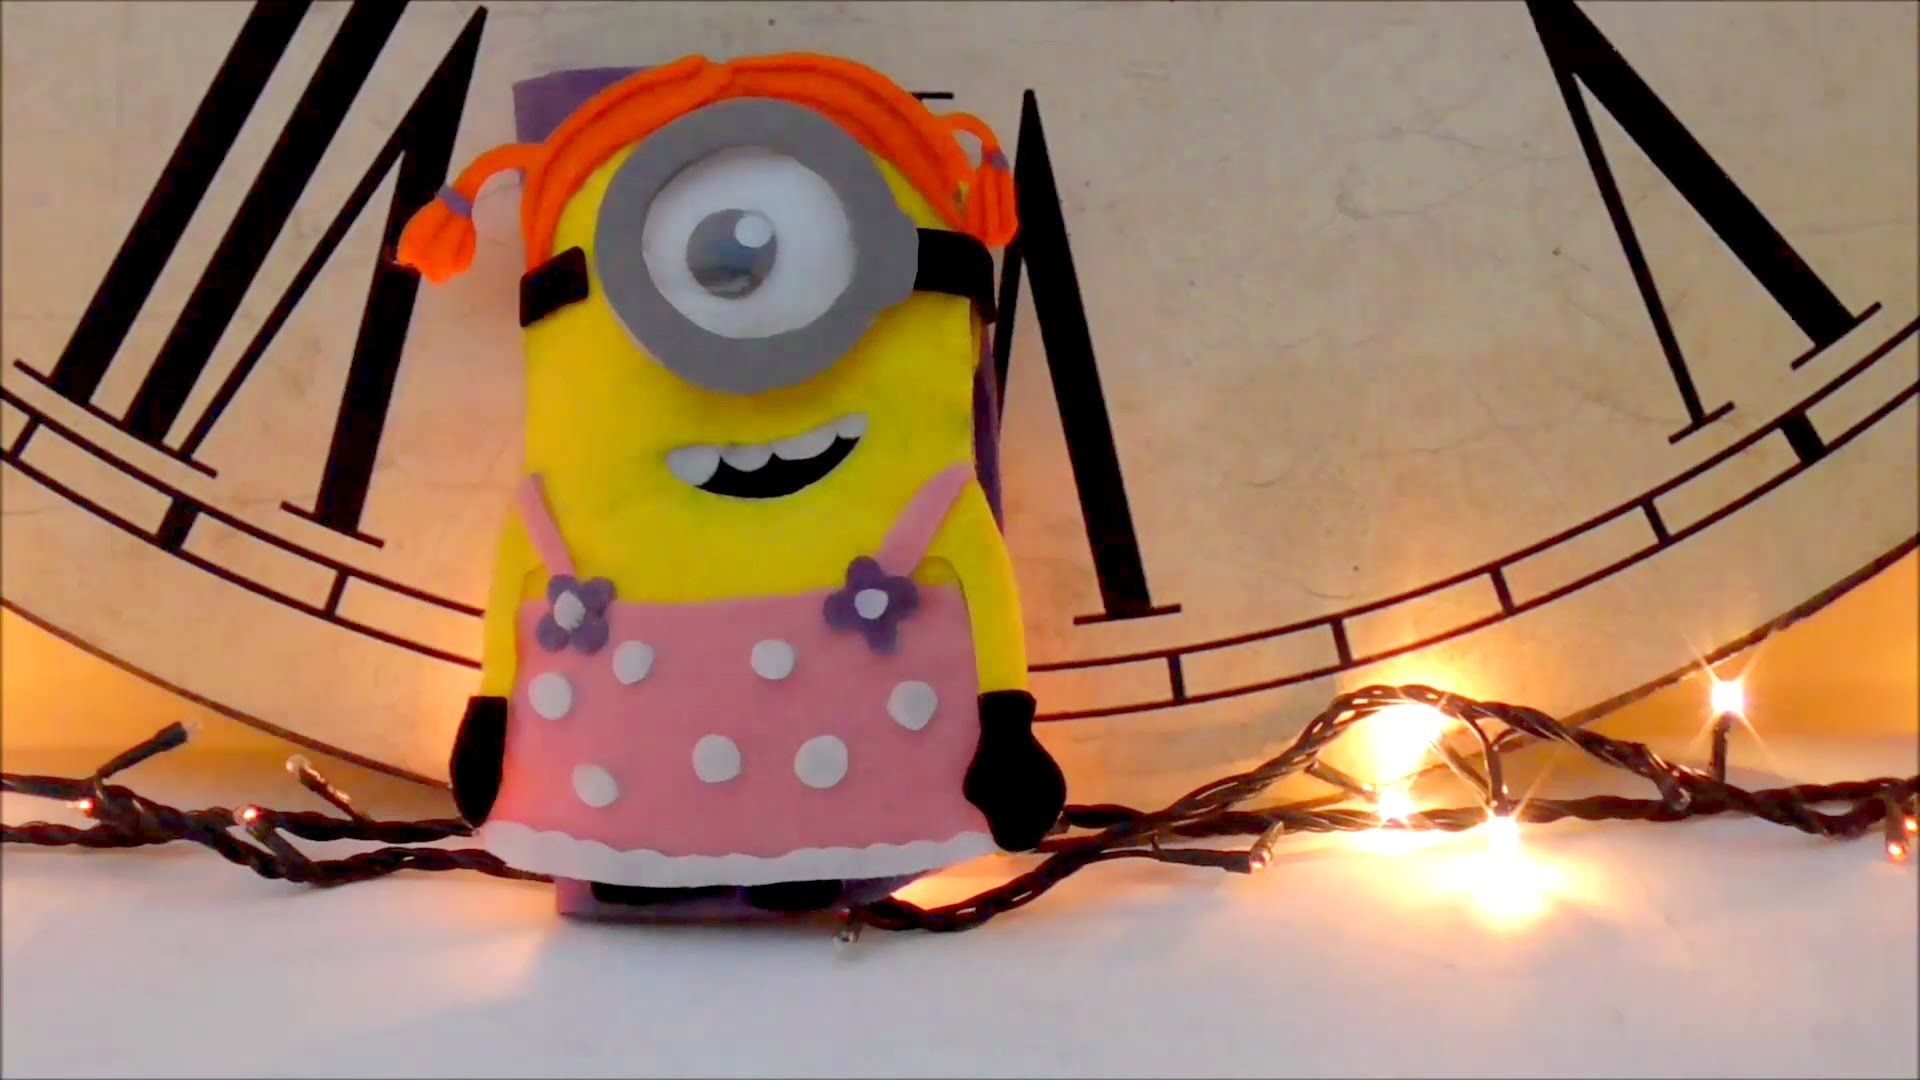 1920x1080 DIY crafts: how to make a minions mobile case with felt - Youtube - Isa â¤ -  YouTube